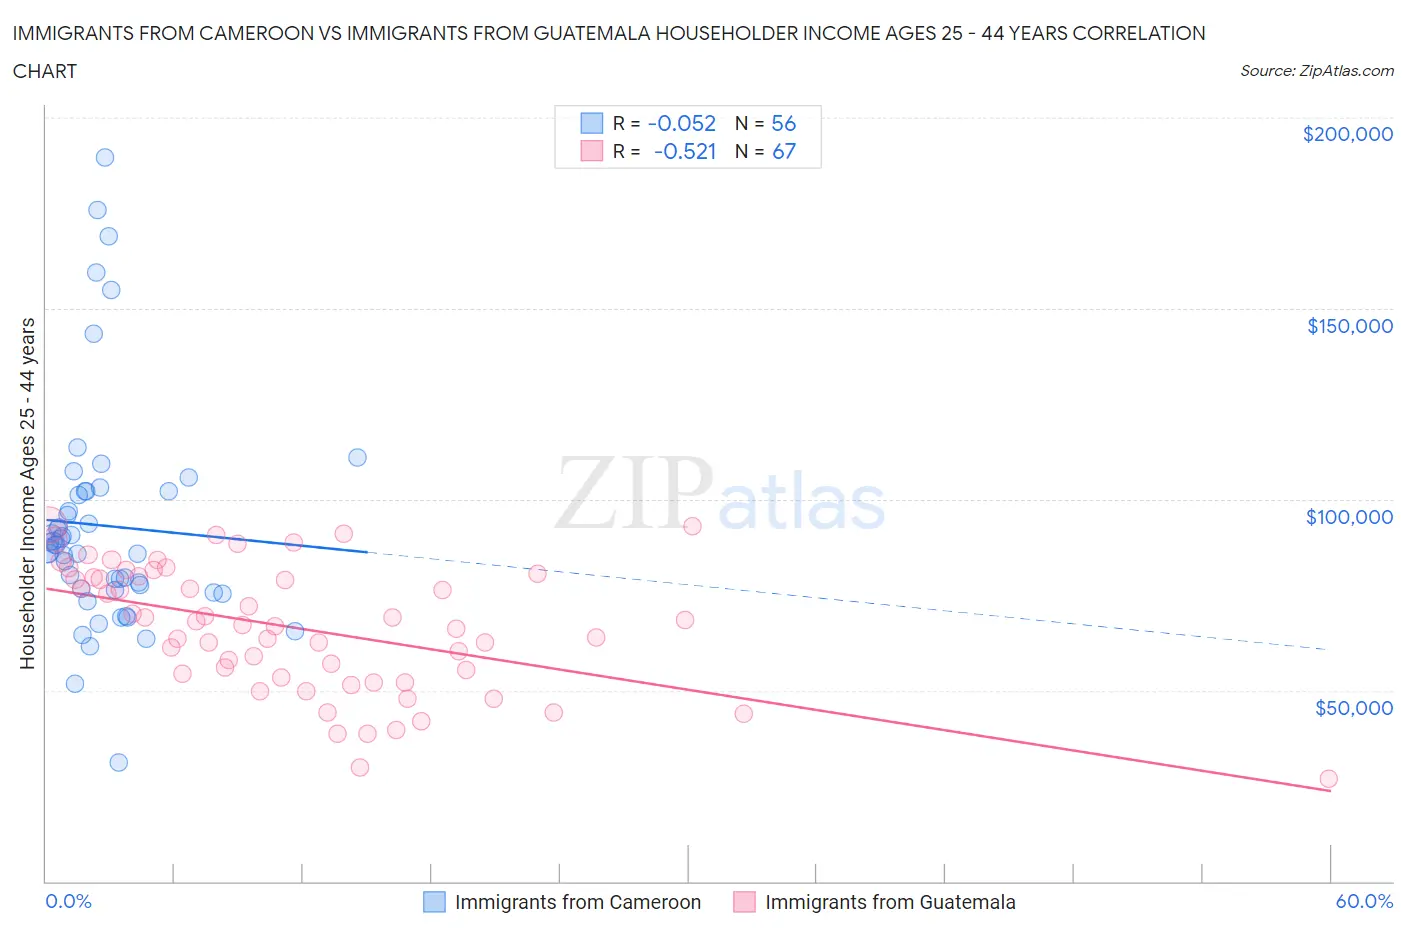 Immigrants from Cameroon vs Immigrants from Guatemala Householder Income Ages 25 - 44 years